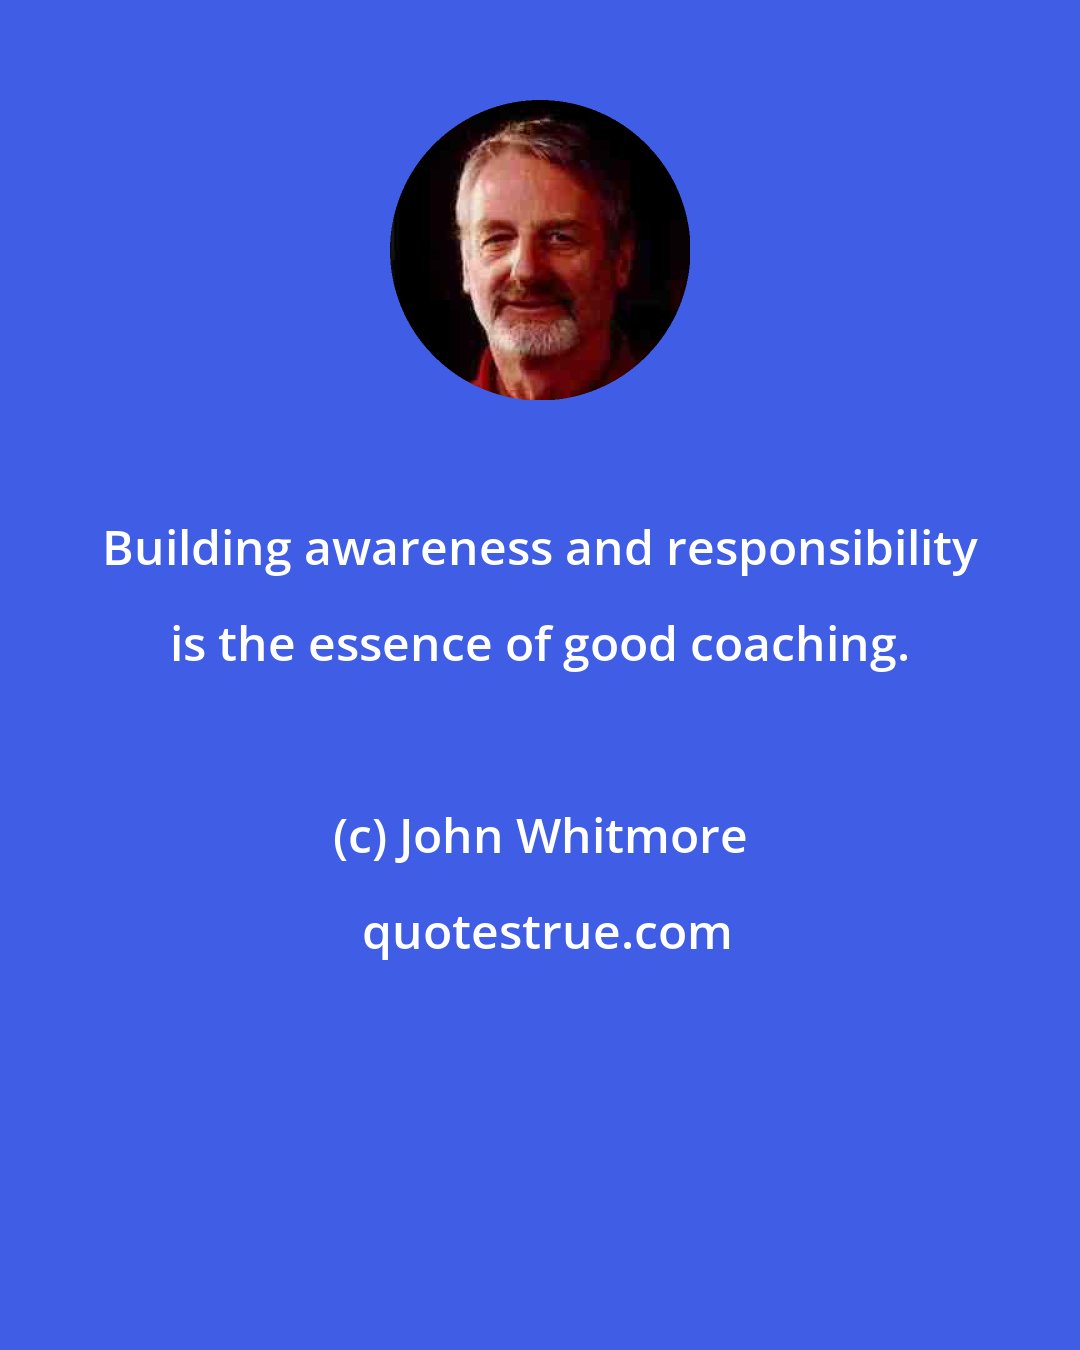 John Whitmore: Building awareness and responsibility is the essence of good coaching.